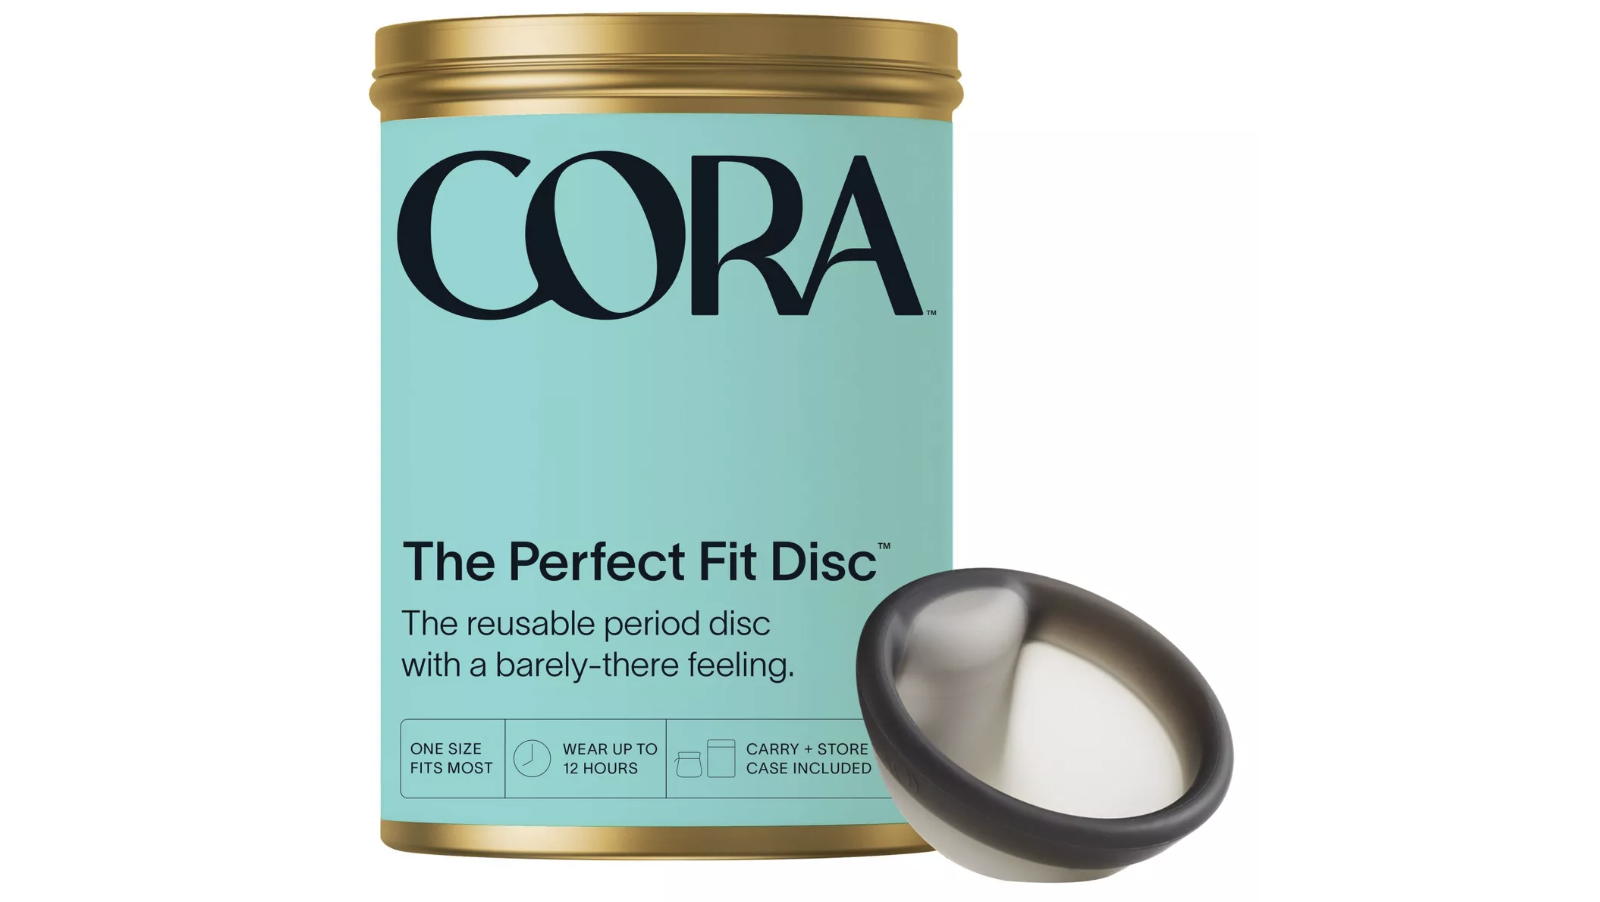 Cora Disc Review and Video How To